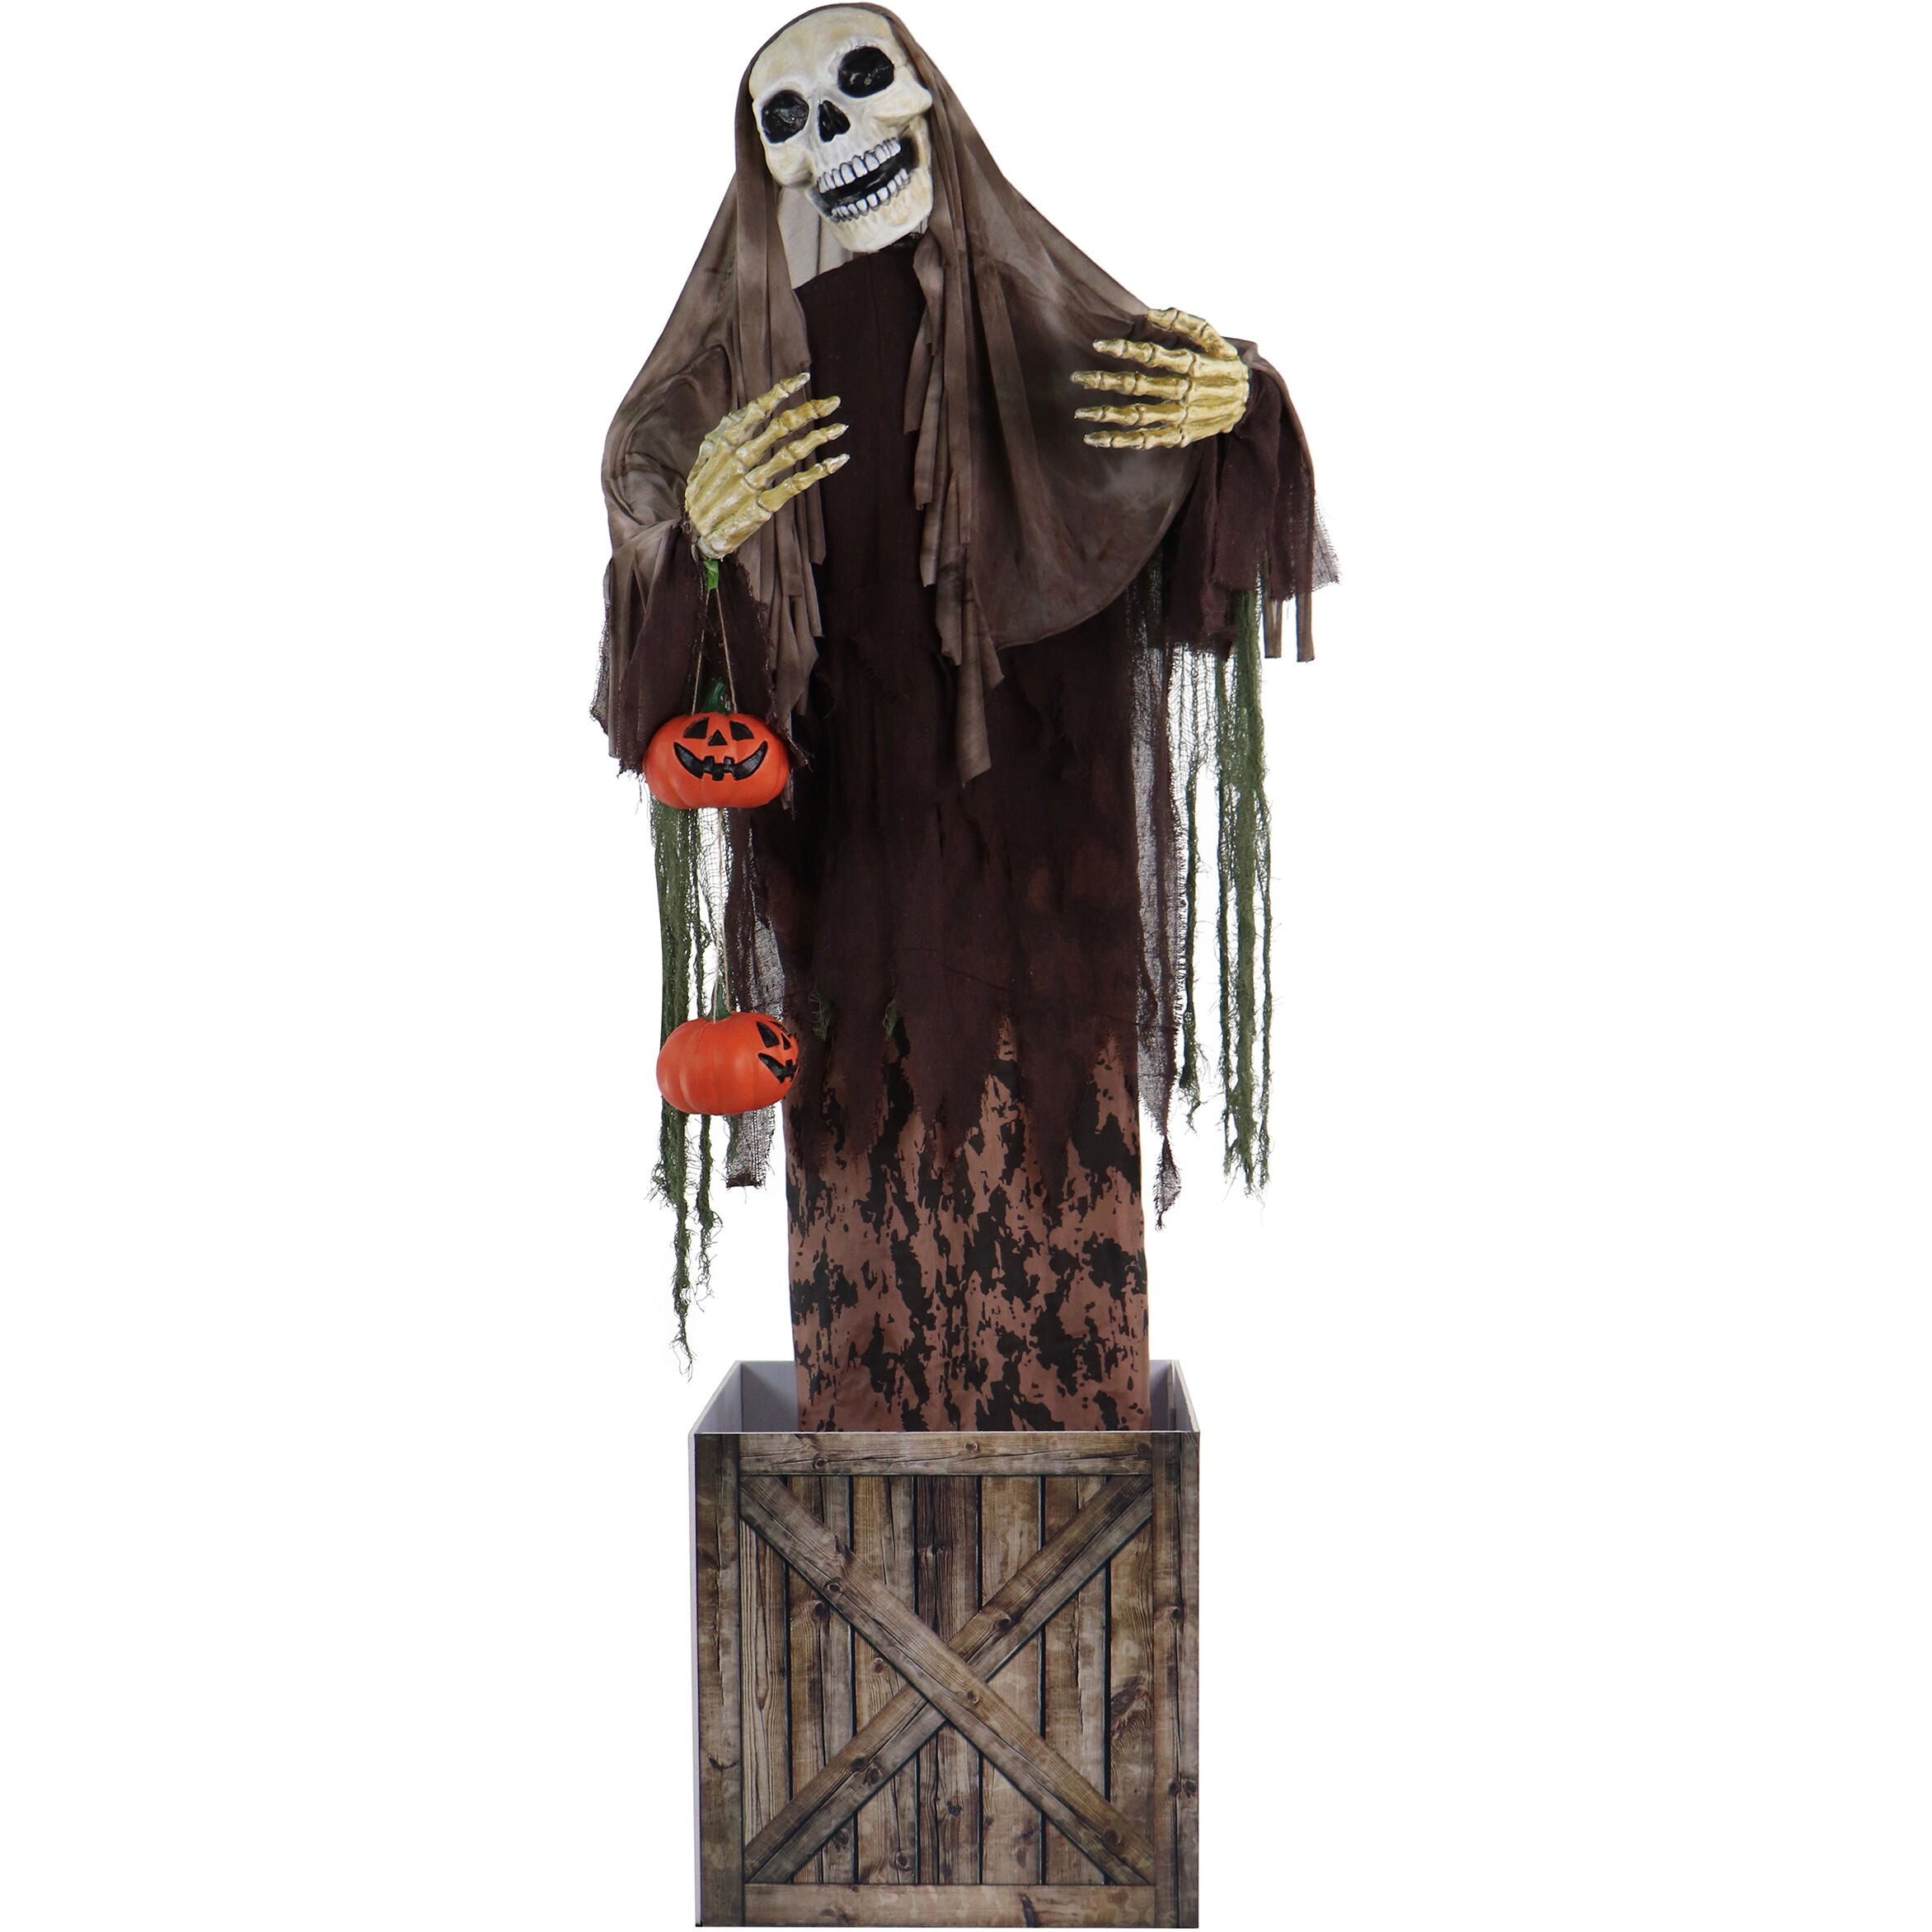 Haunted Hill Farm - Animatronic Skeleton in a Box with Movement, Sounds, and Light-Up Eyes for Scary Halloween Decoration